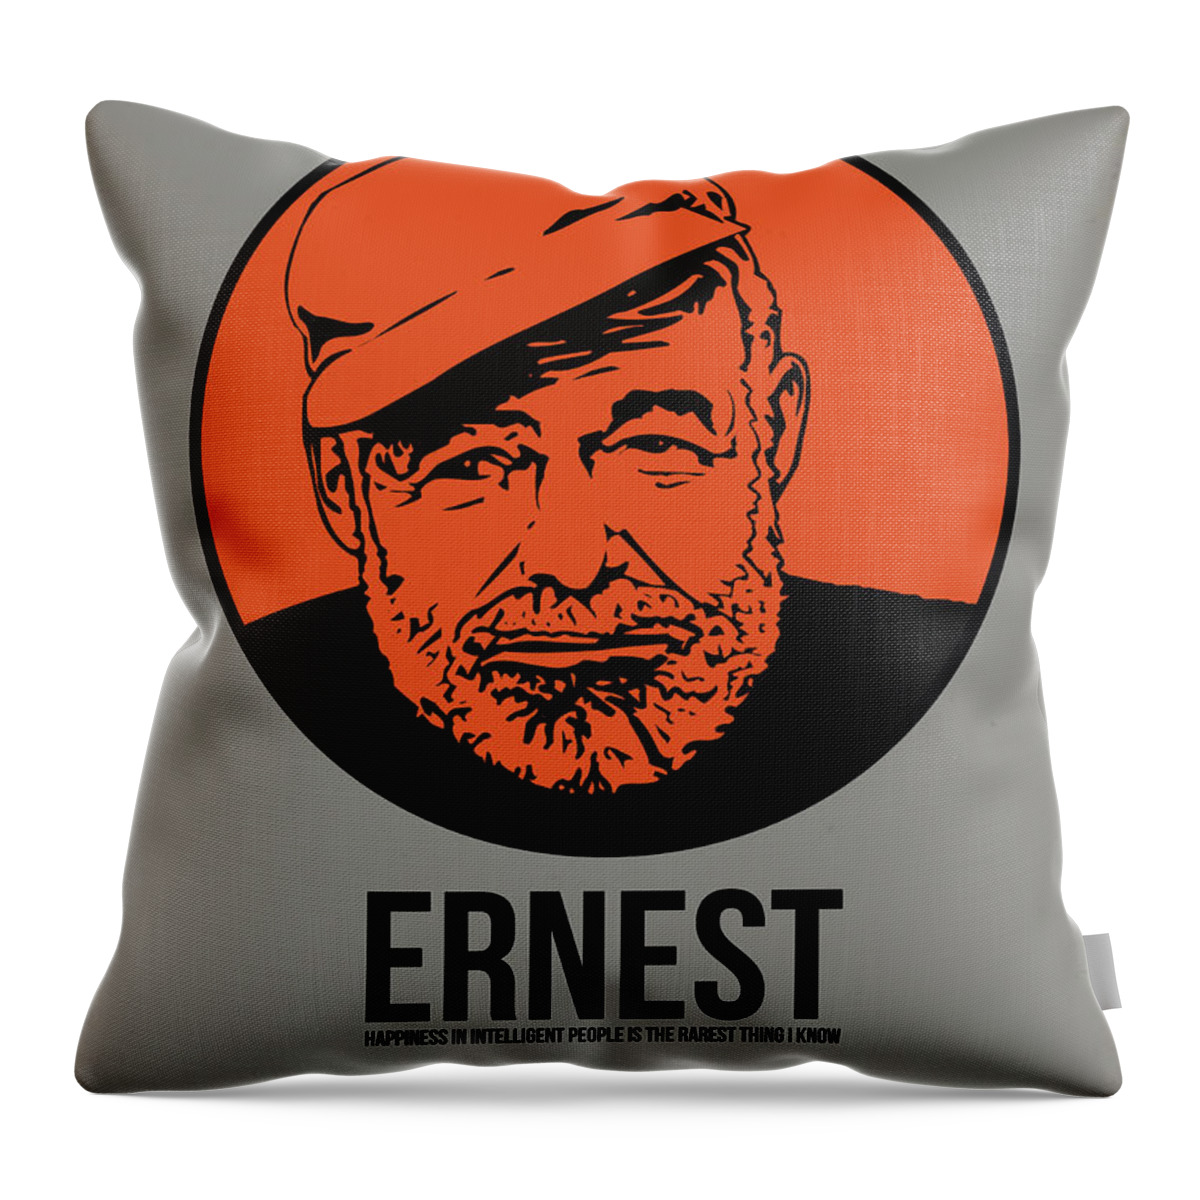 Author Throw Pillow featuring the digital art Ernest Poster 1 by Naxart Studio